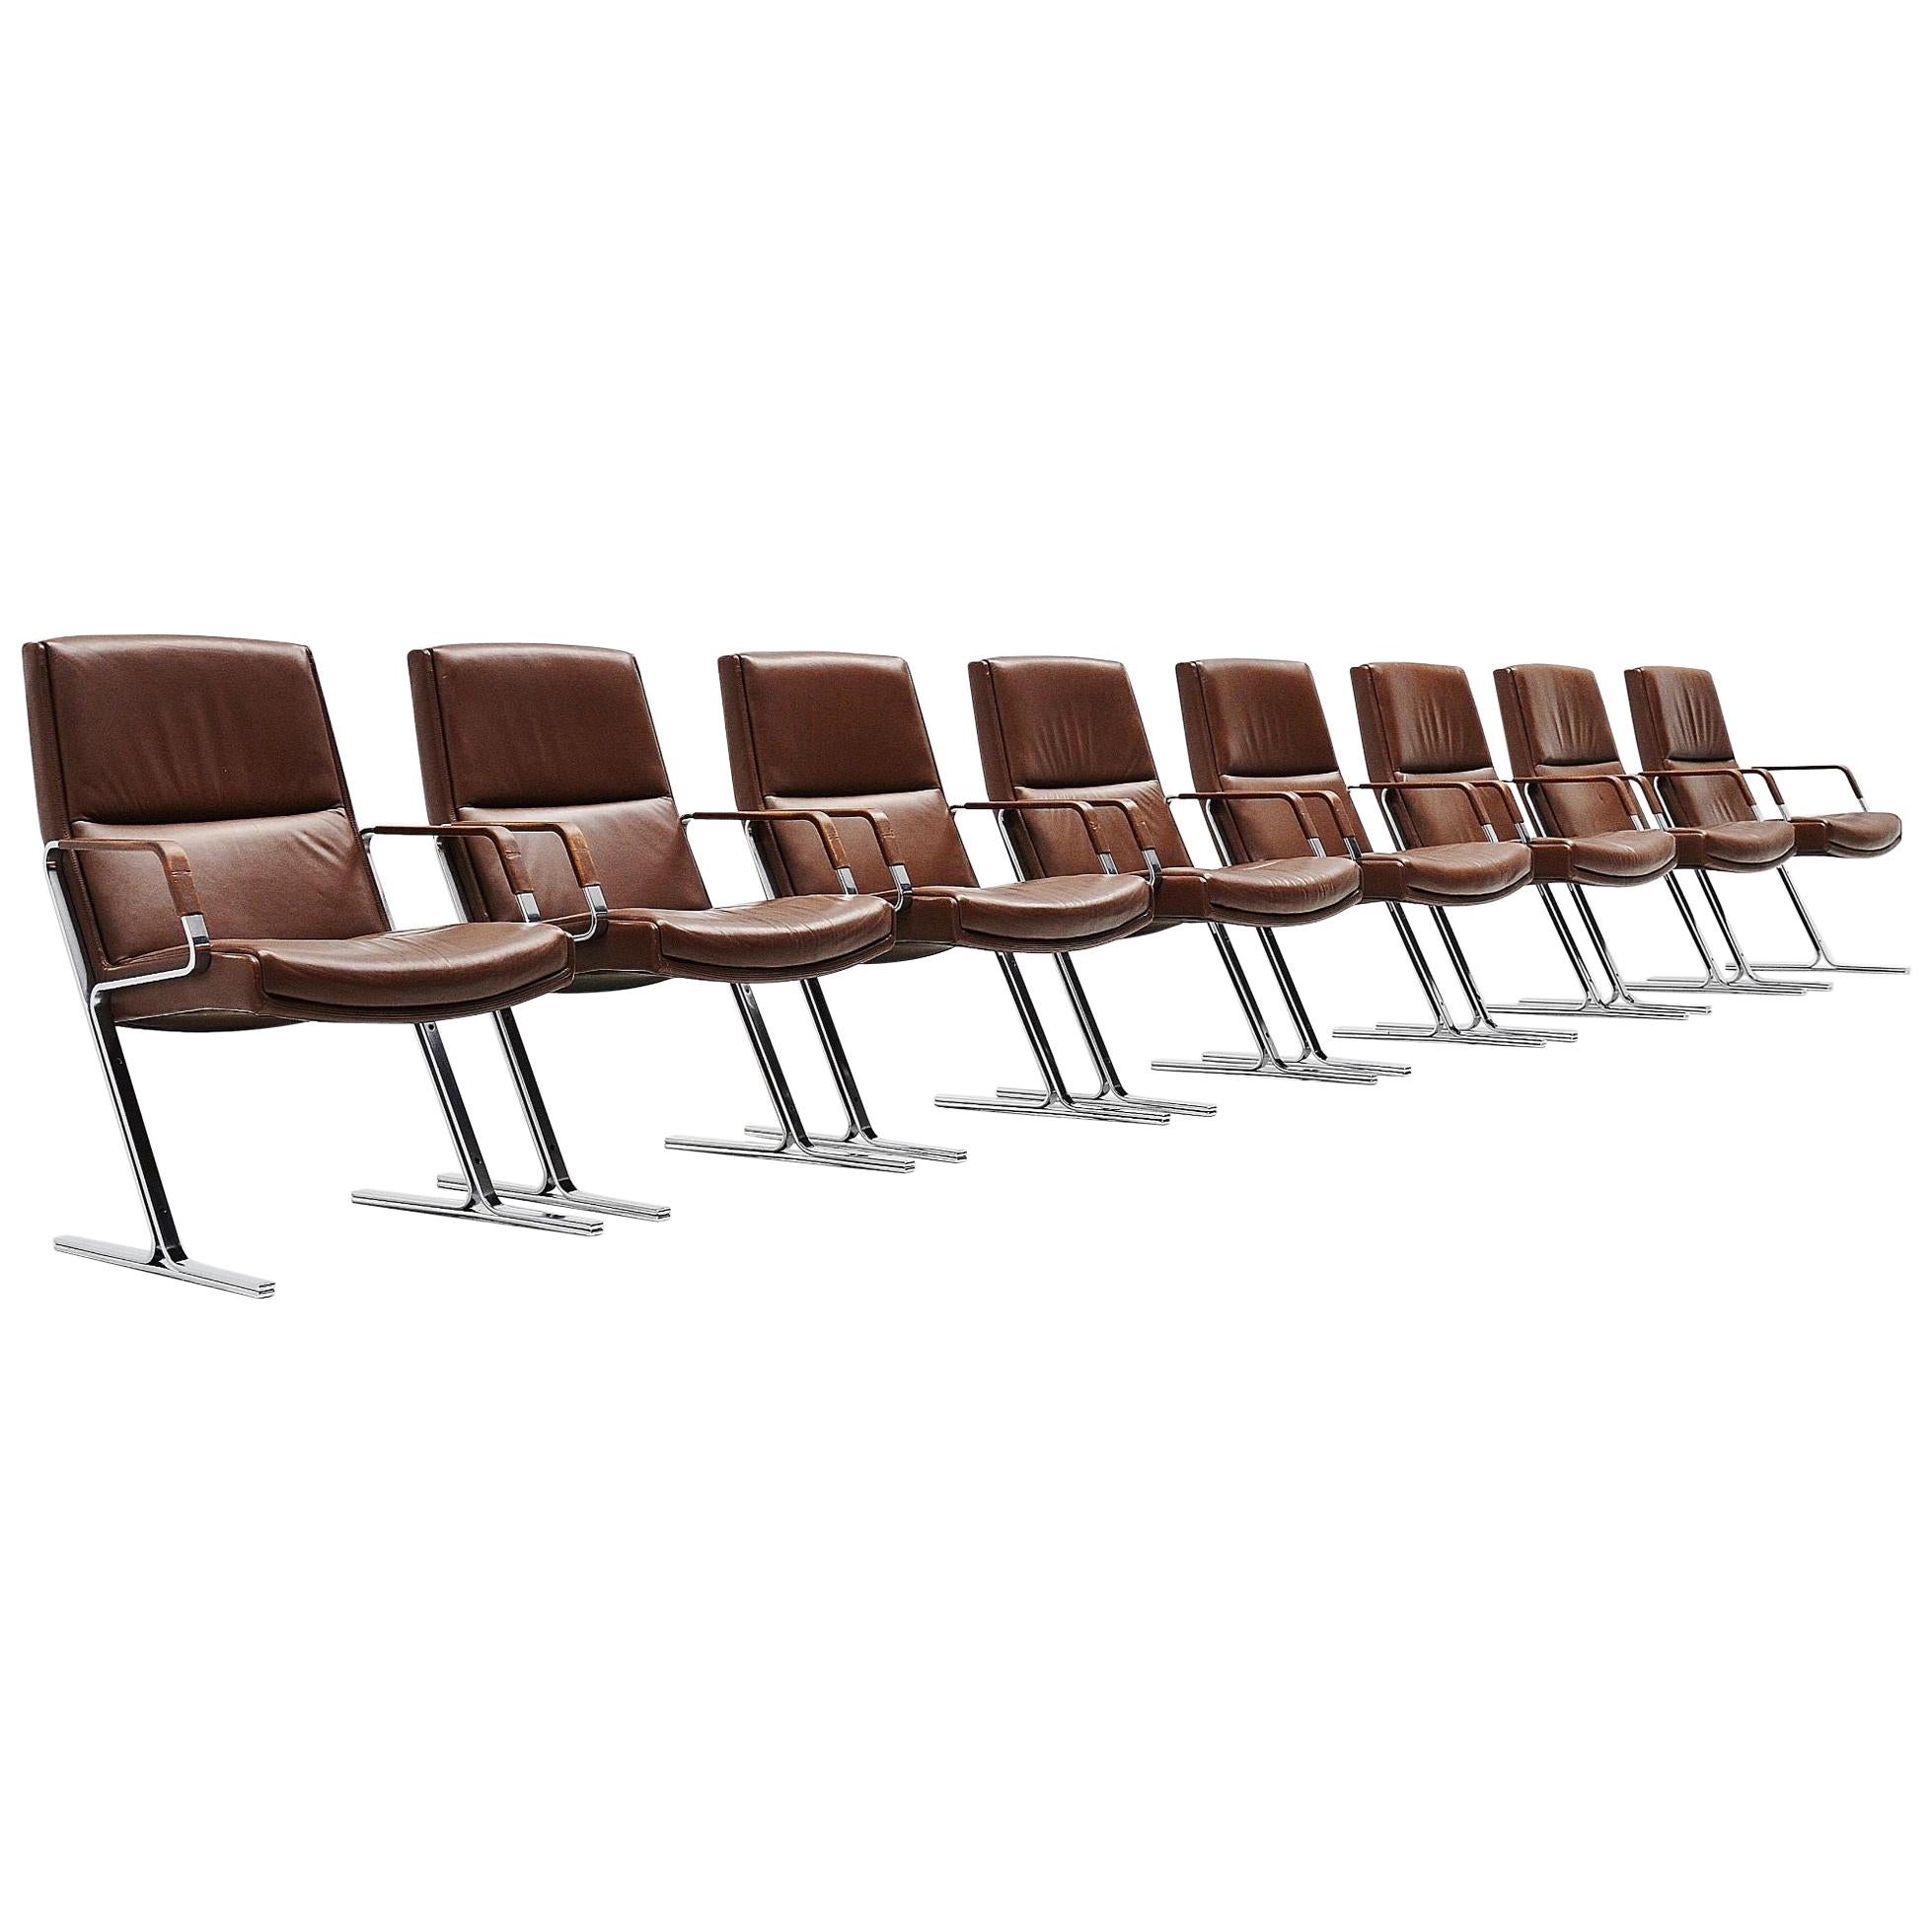 Fabricius Kastholm FK711 Office Chairs Walter Knoll, Germany, 1971